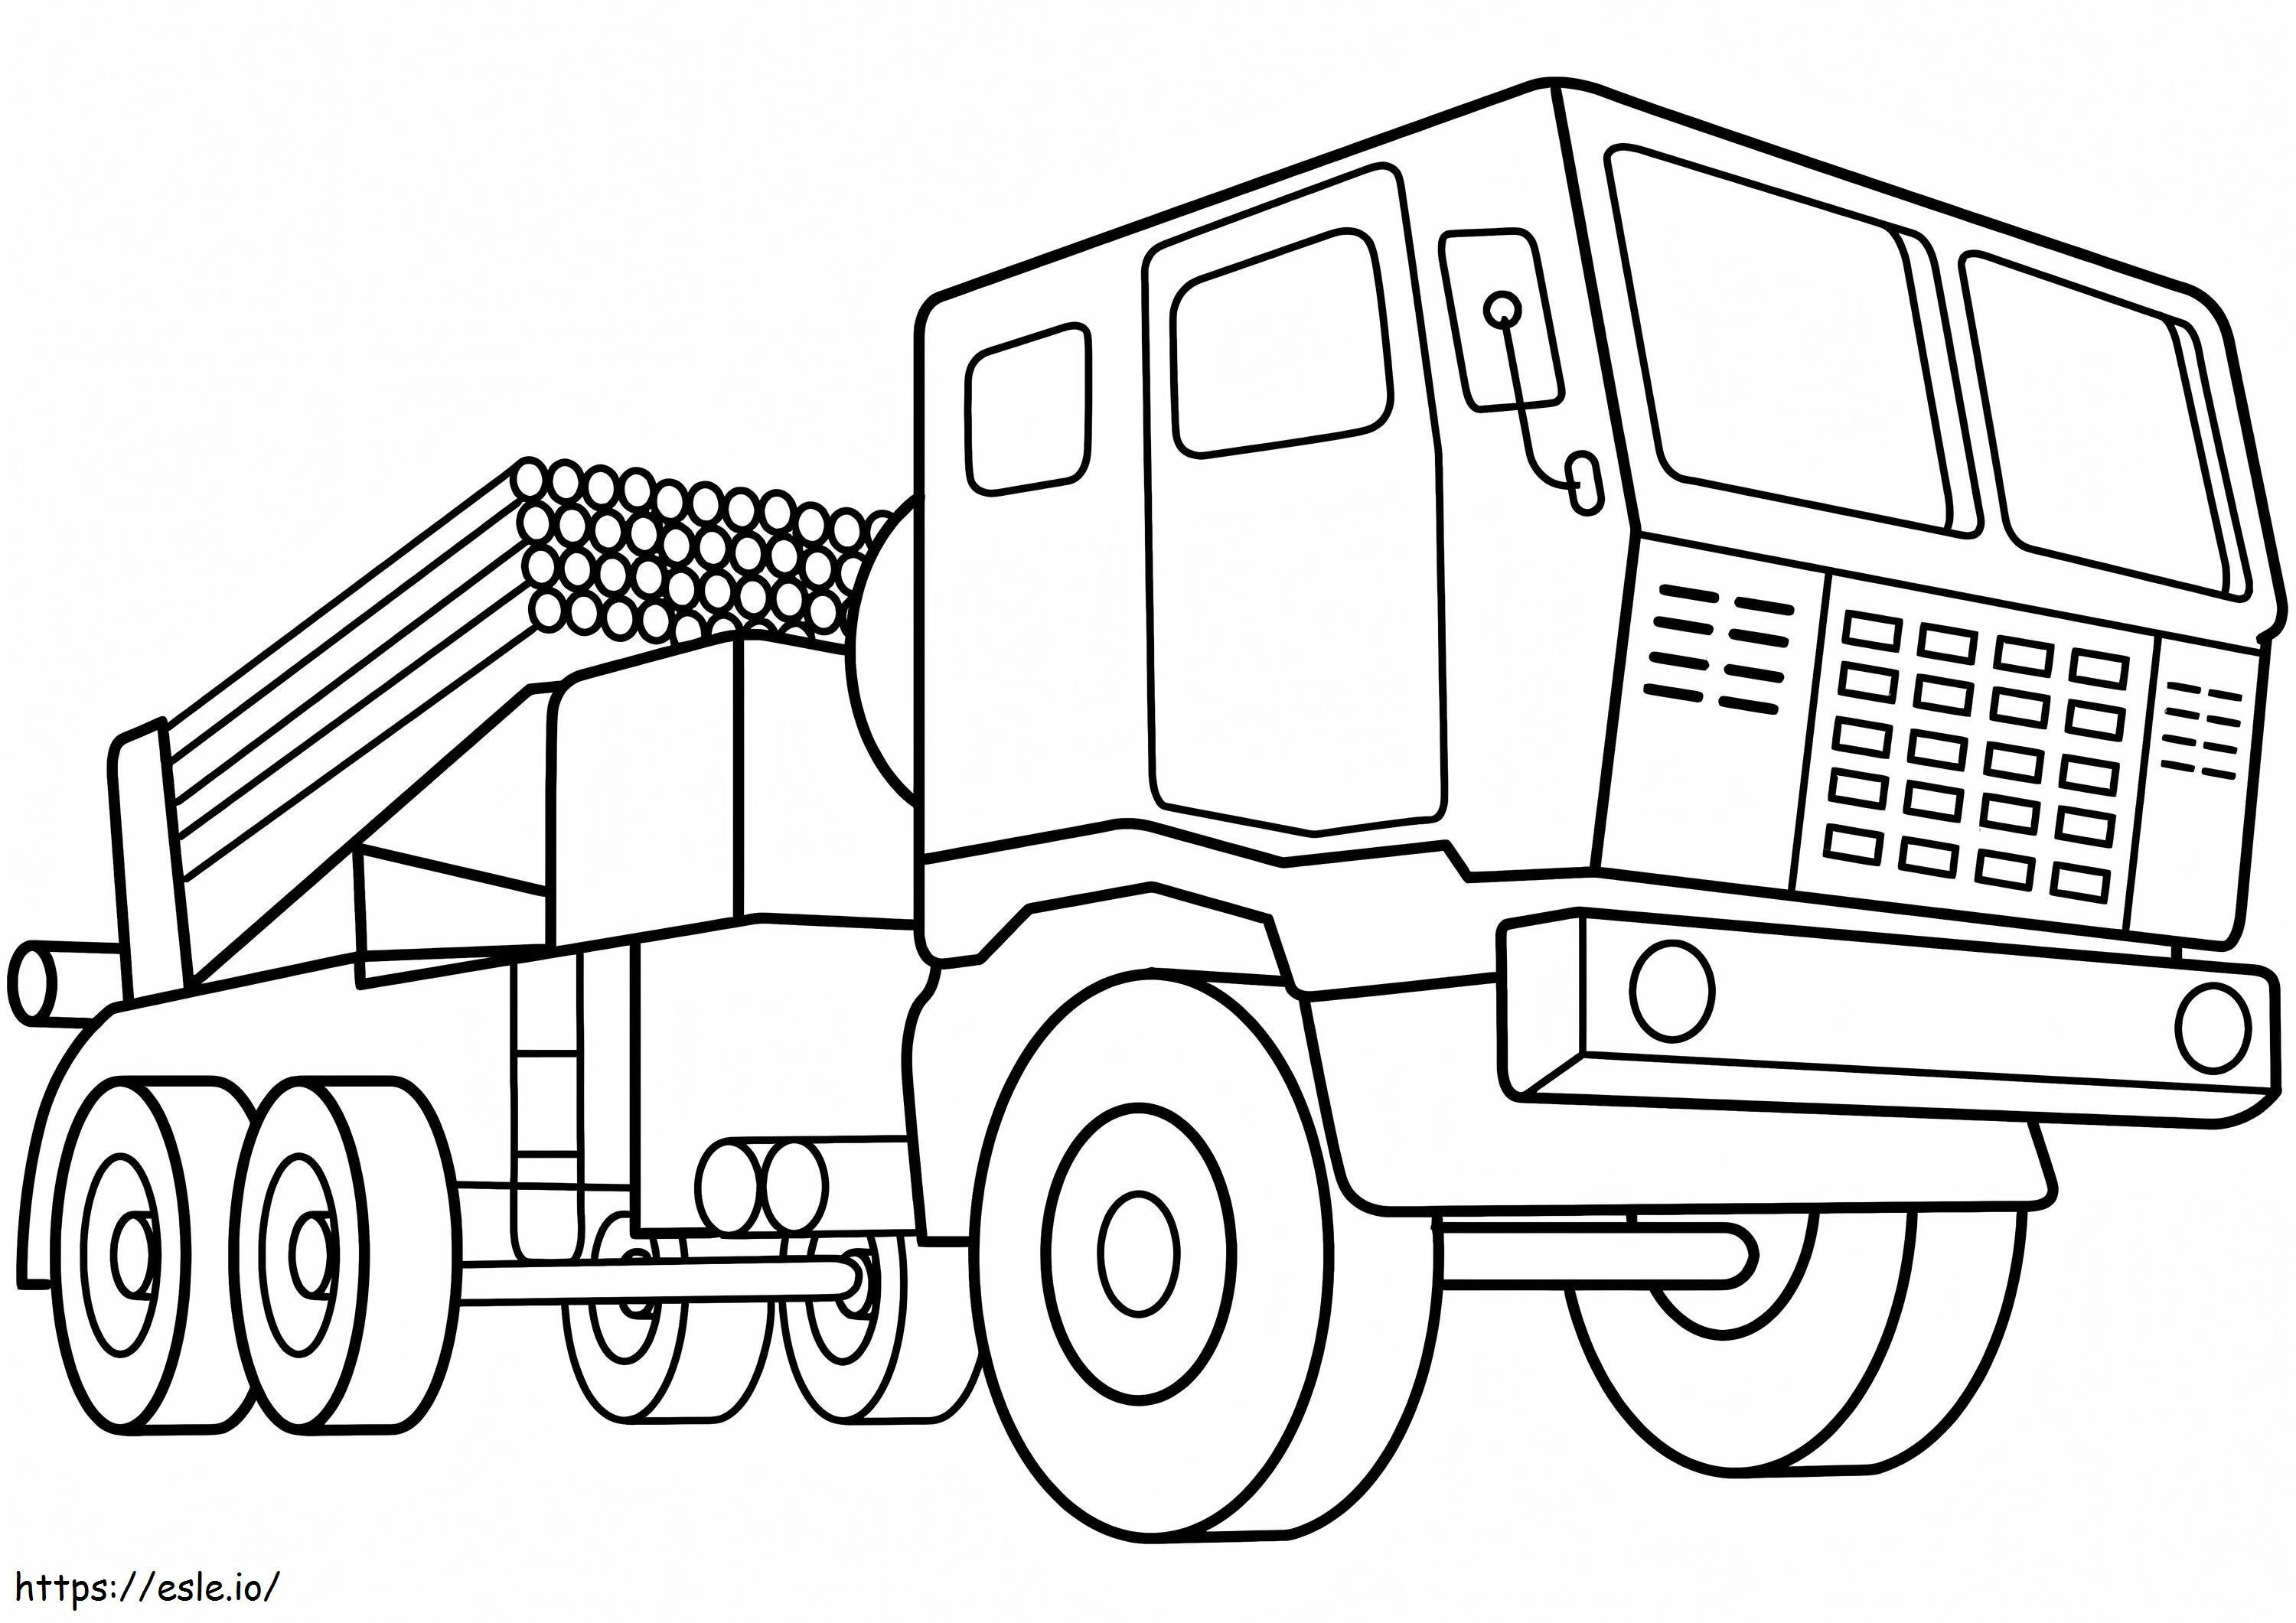 Multiple Launch Rocket System coloring page